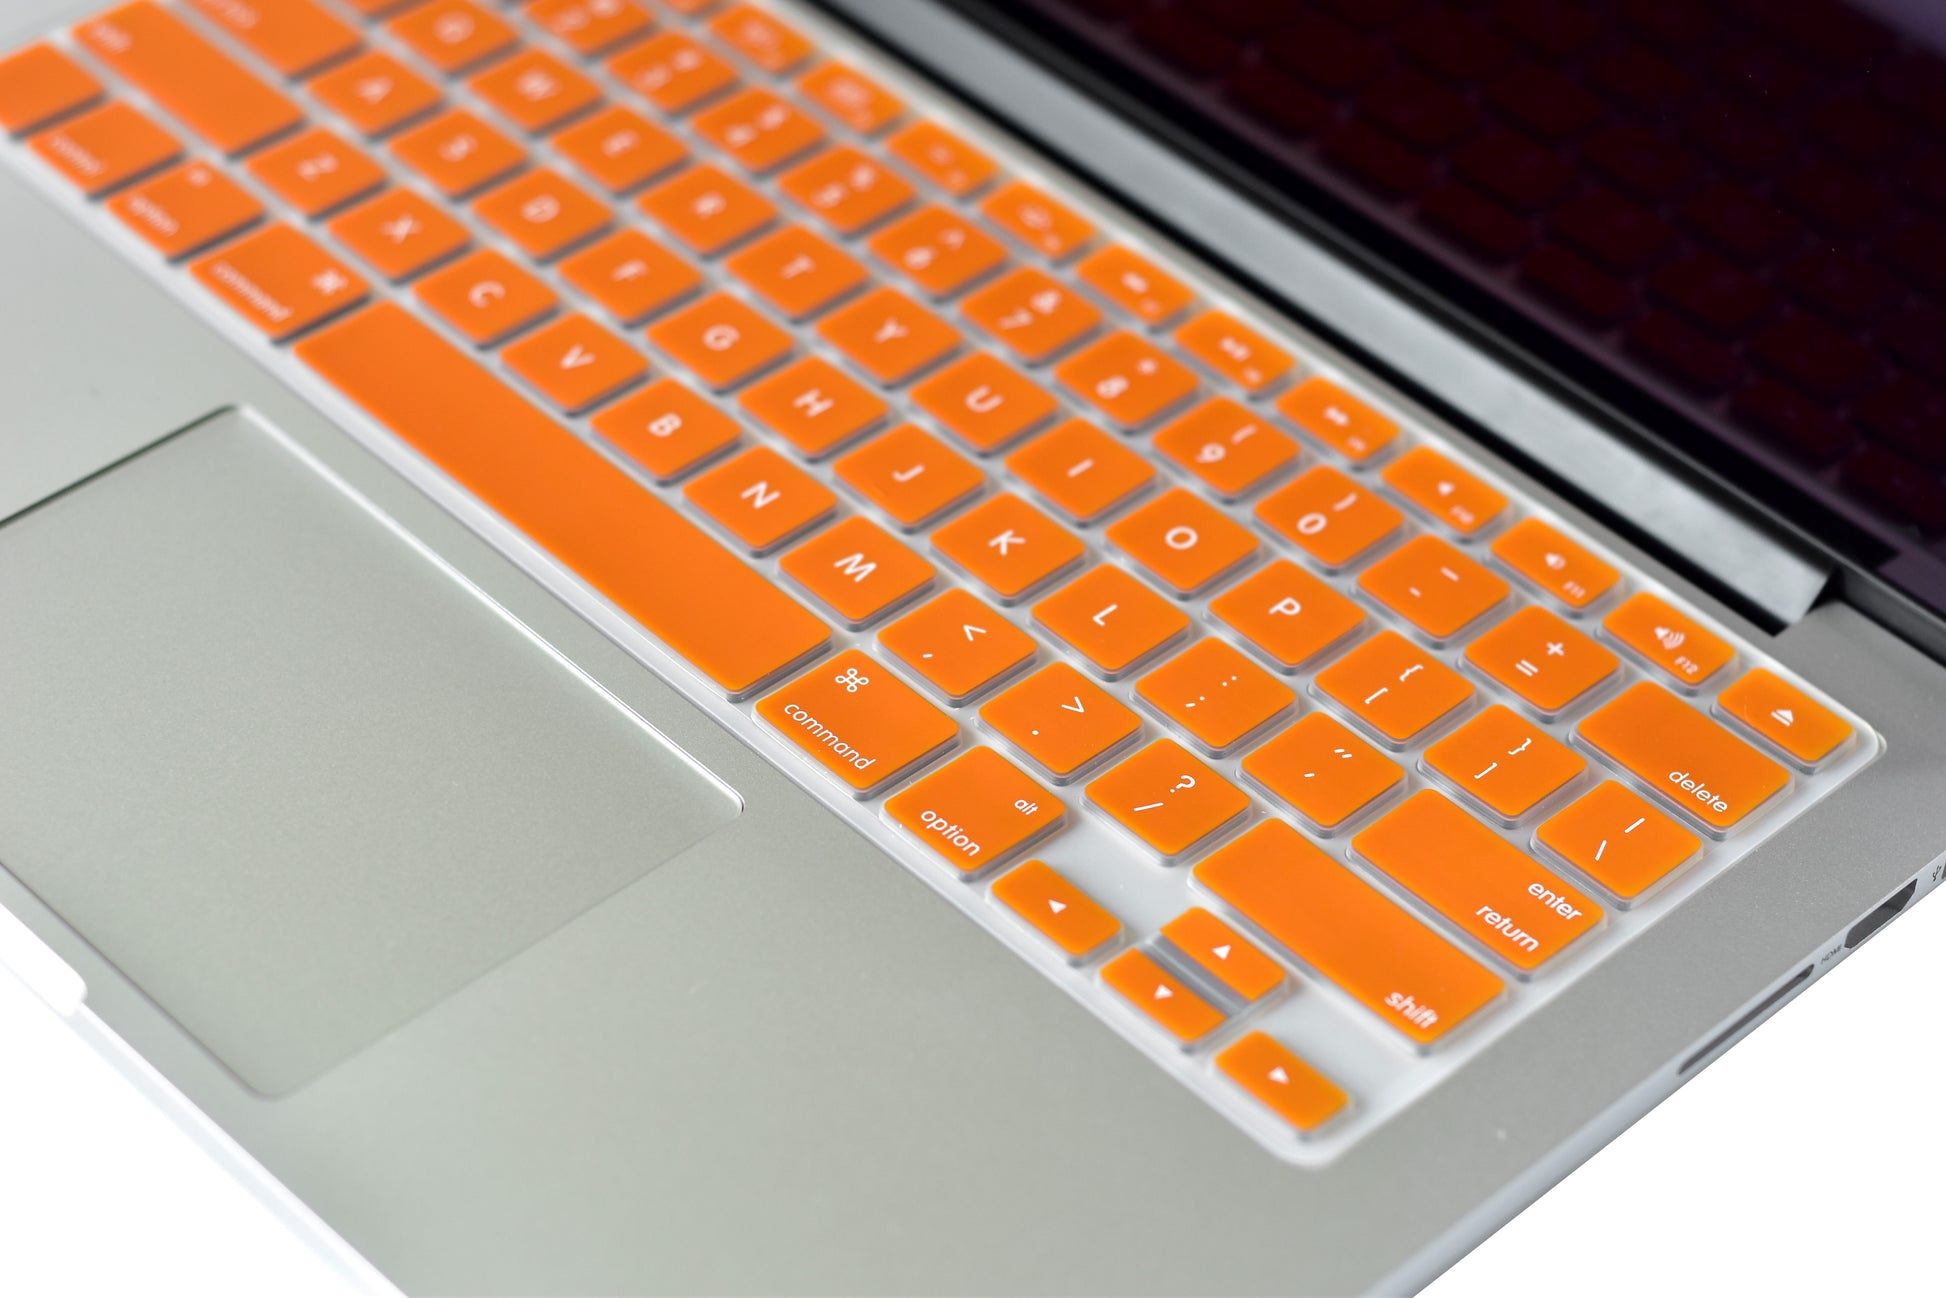 15 Best Mac Keyboard Cover for 2023